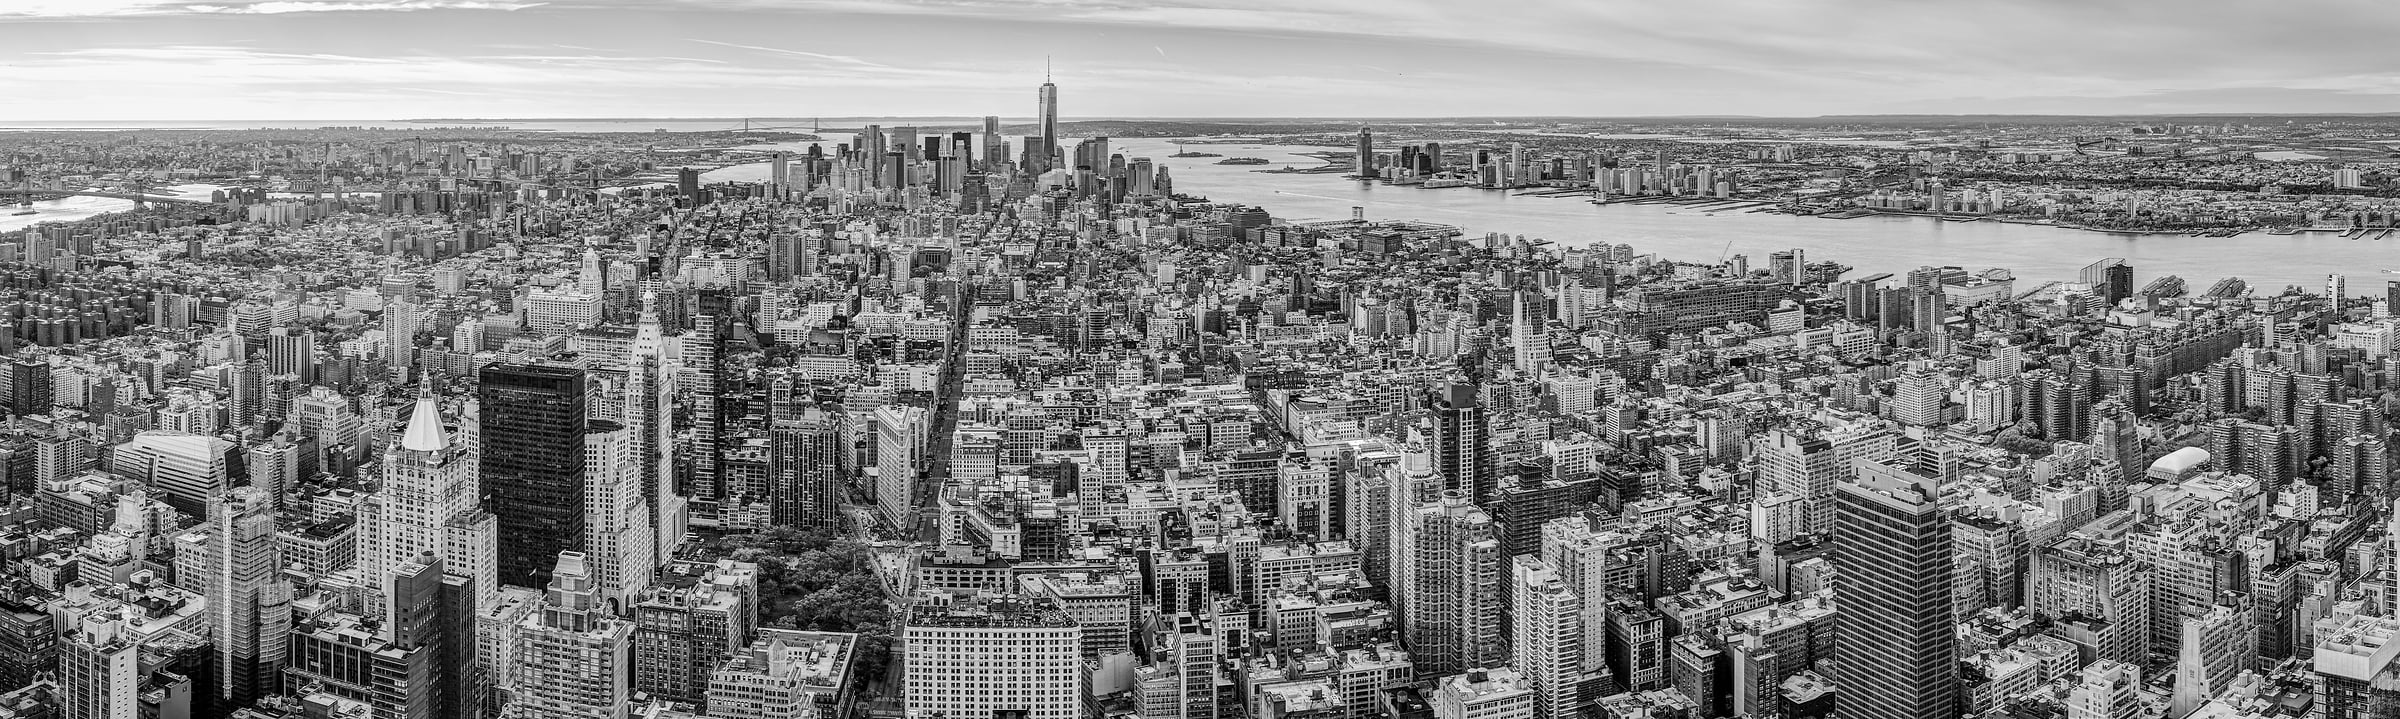 416 megapixels! A very high resolution, black & white aerial photo of New York City; cityscape photograph created by Tim Lo Monaco at the Empire State Building in Manhattan, New York City, New York.